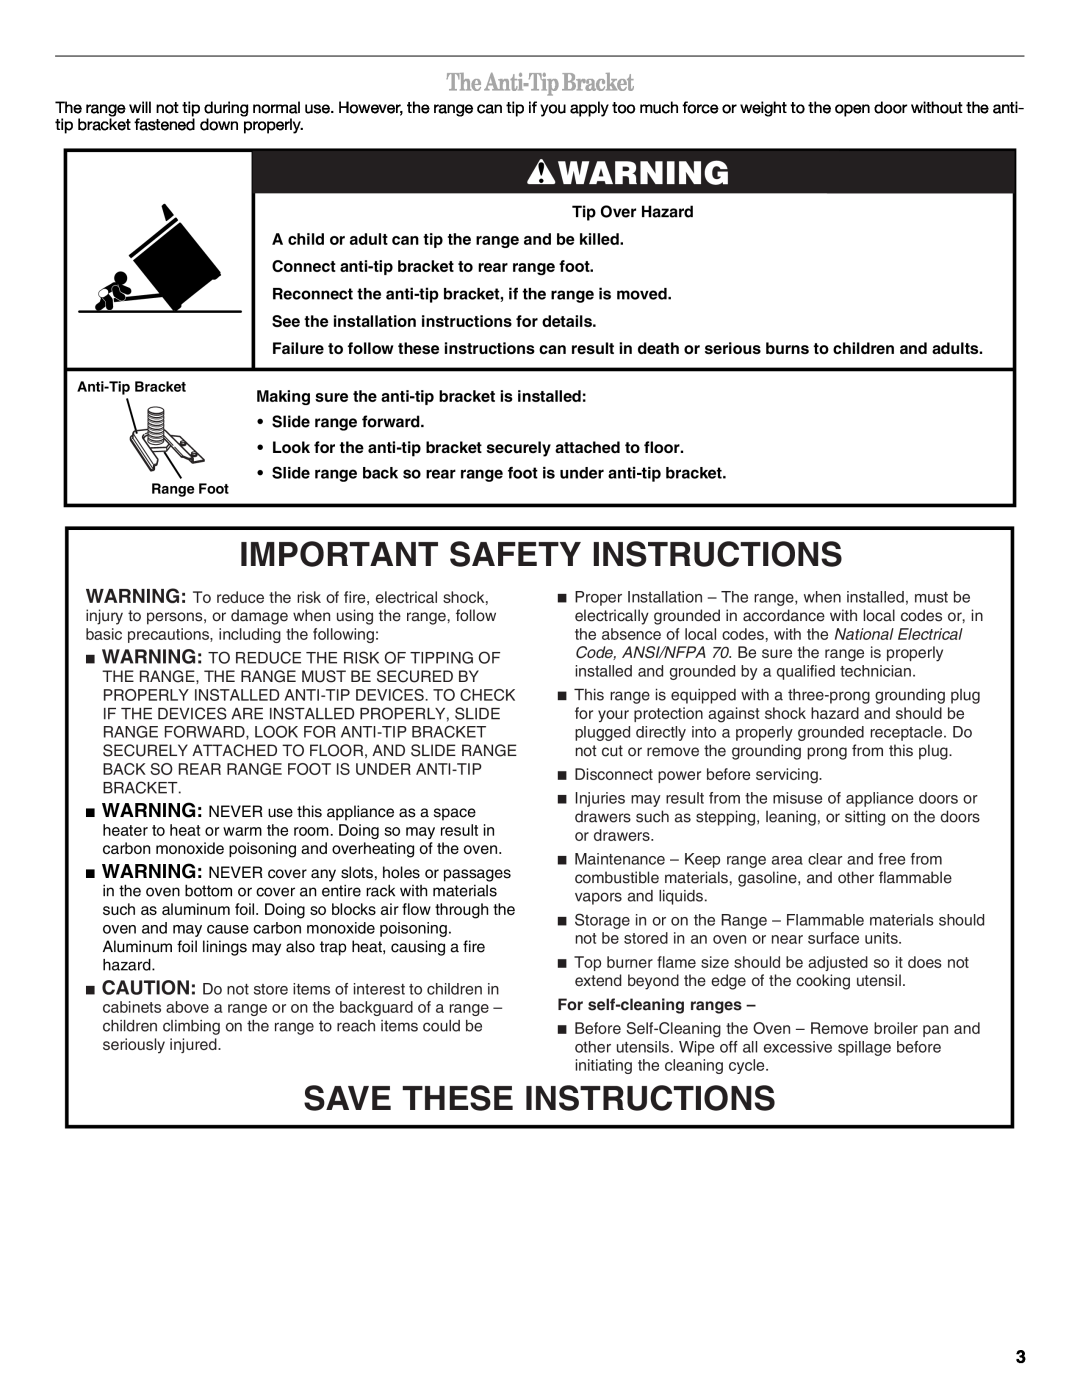 Amana AGR5844VDW warranty The Anti-TipBracket, Important Safety Instructions, Save These Instructions, Tip Over Hazard 